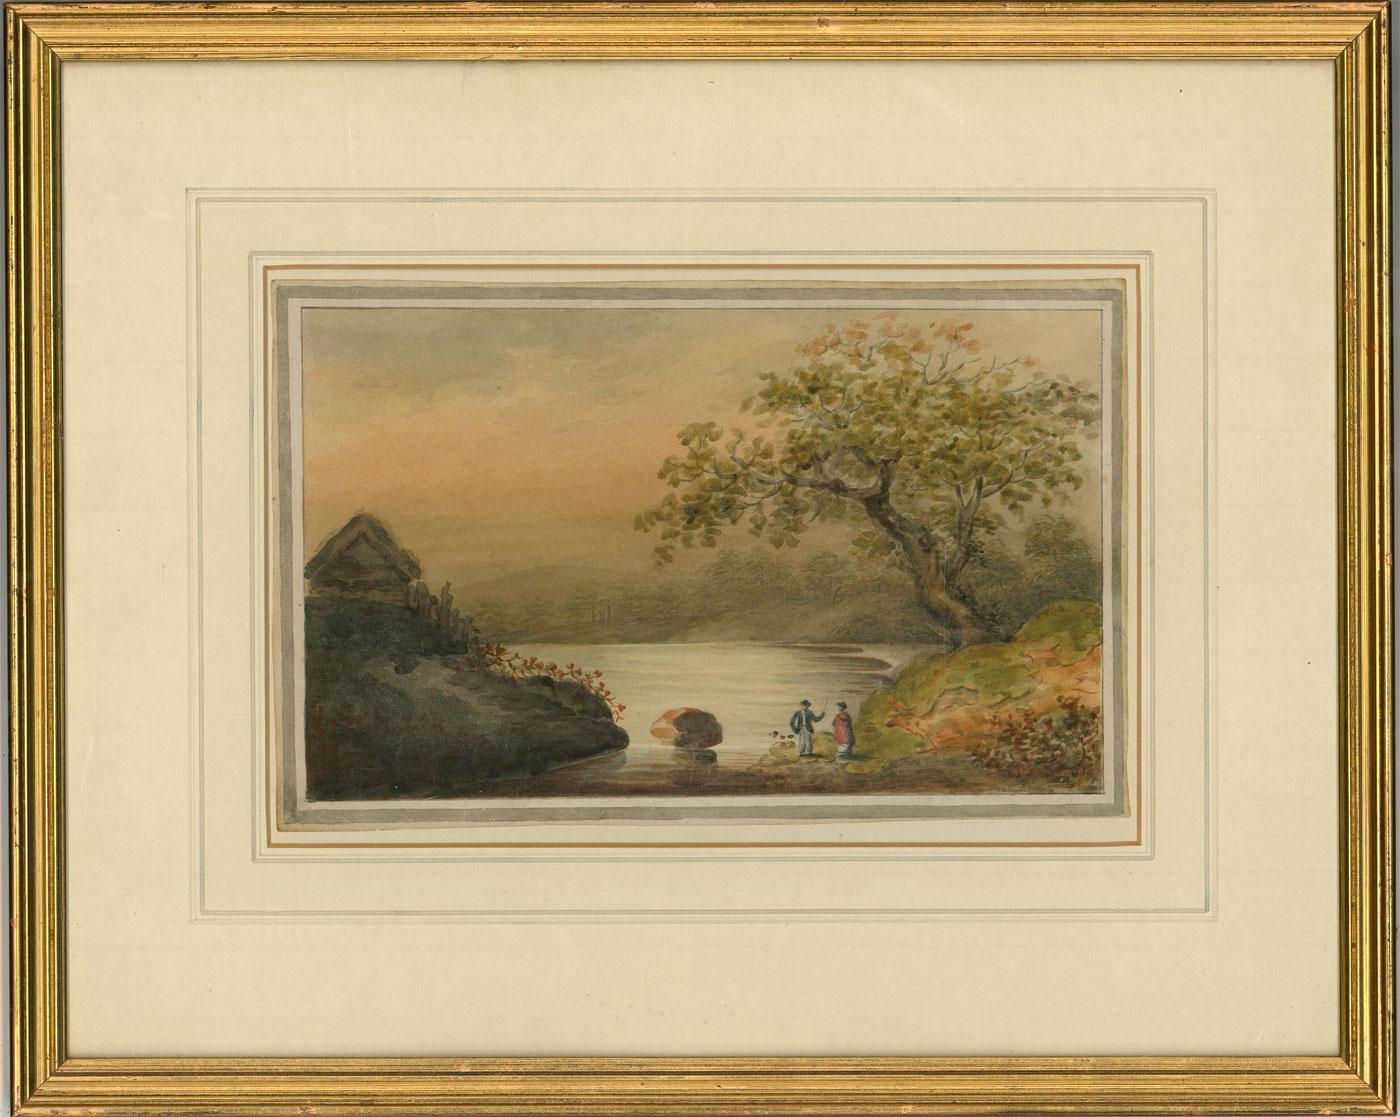 A delightful watercolour by the listed artist Gideon Yates (act.1790-c.1837), depicting two figures in conversation overlooking the sunset by the calm river. The delicate application of colour and considered brushstrokes beautifully brings together